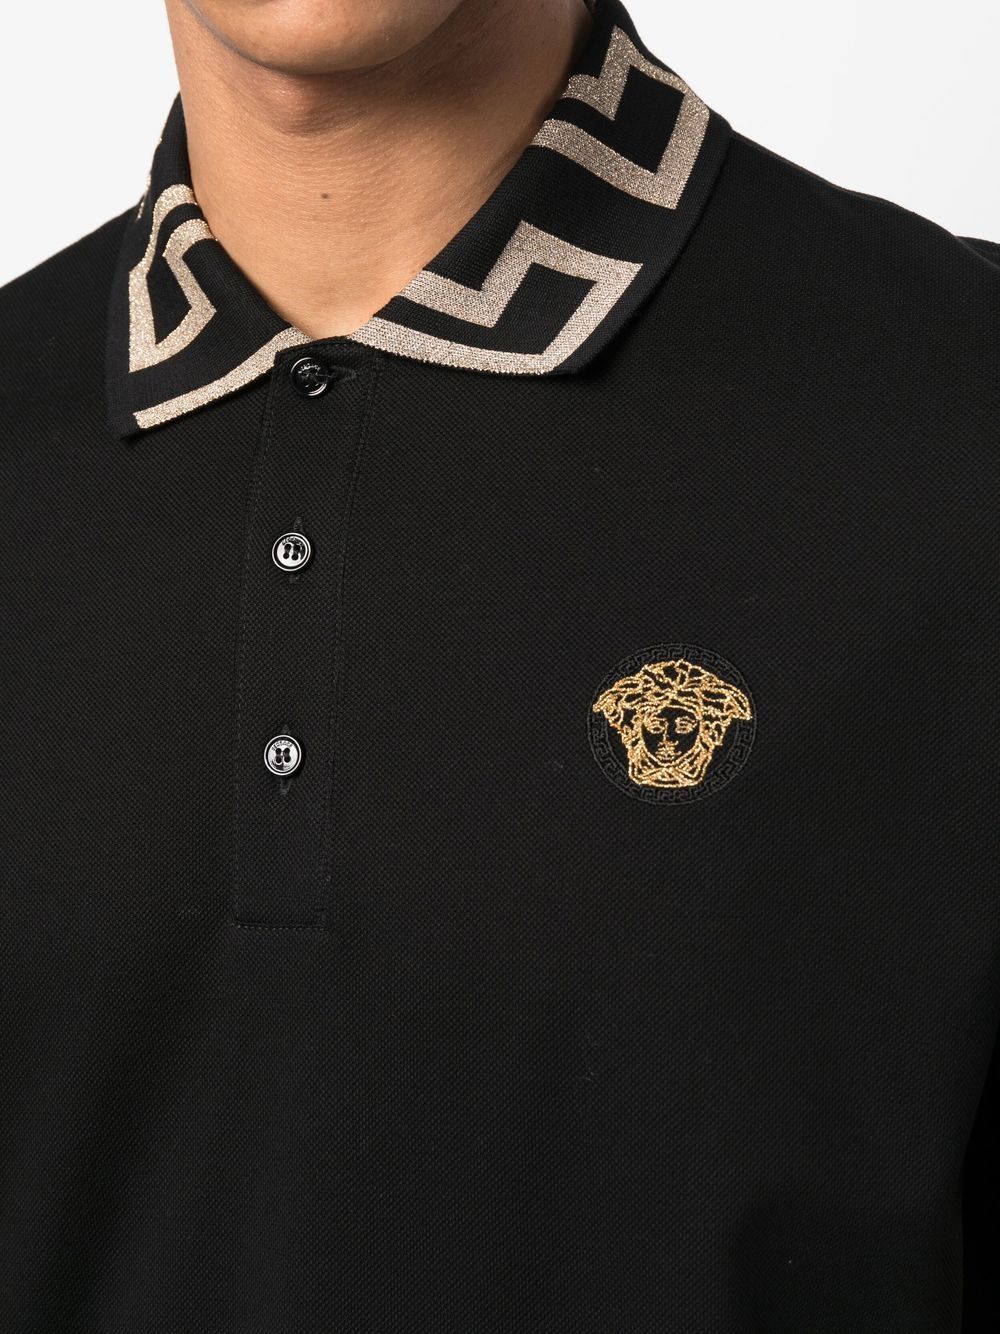 Versace Black Polo with Medusa and Gold Lurex Greek Key Collar